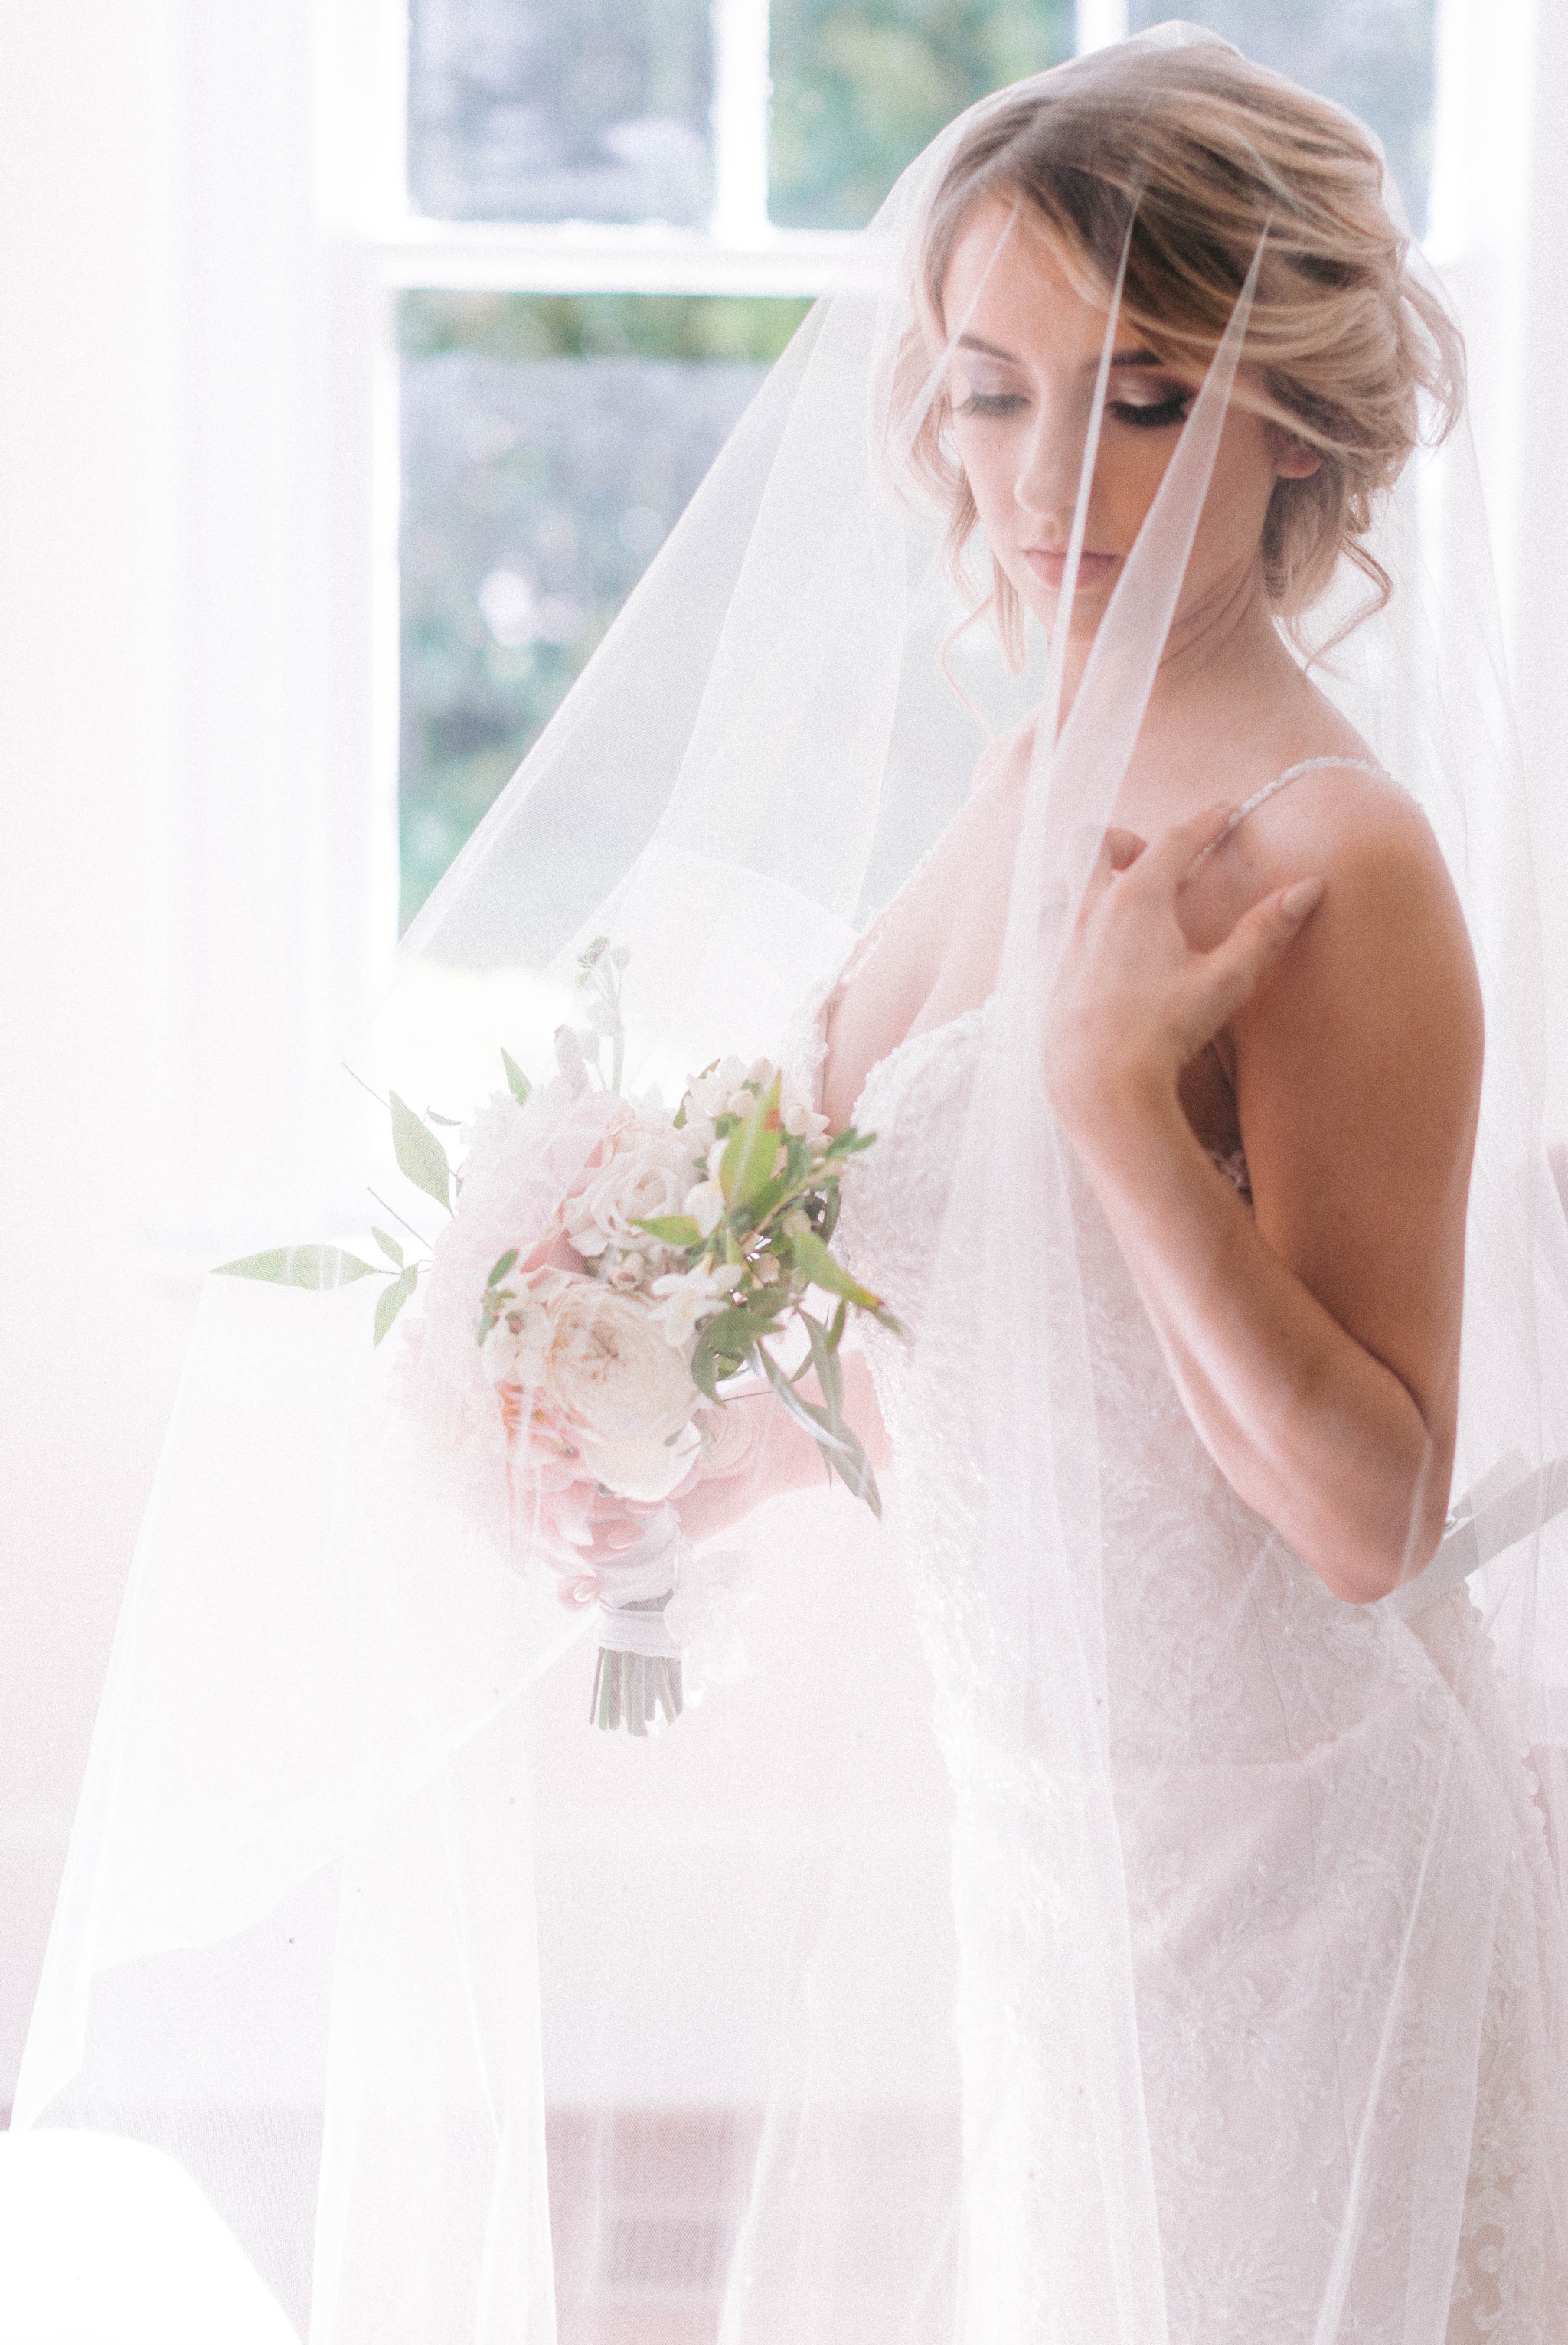  black and white Indoor Natural Light Bridal Portraits by a window with a white backdrop - classic bride with soft drop veil over her face - wedding gown by Stella York - Honolulu, Oahu, Hawaii Wedding Photographer 